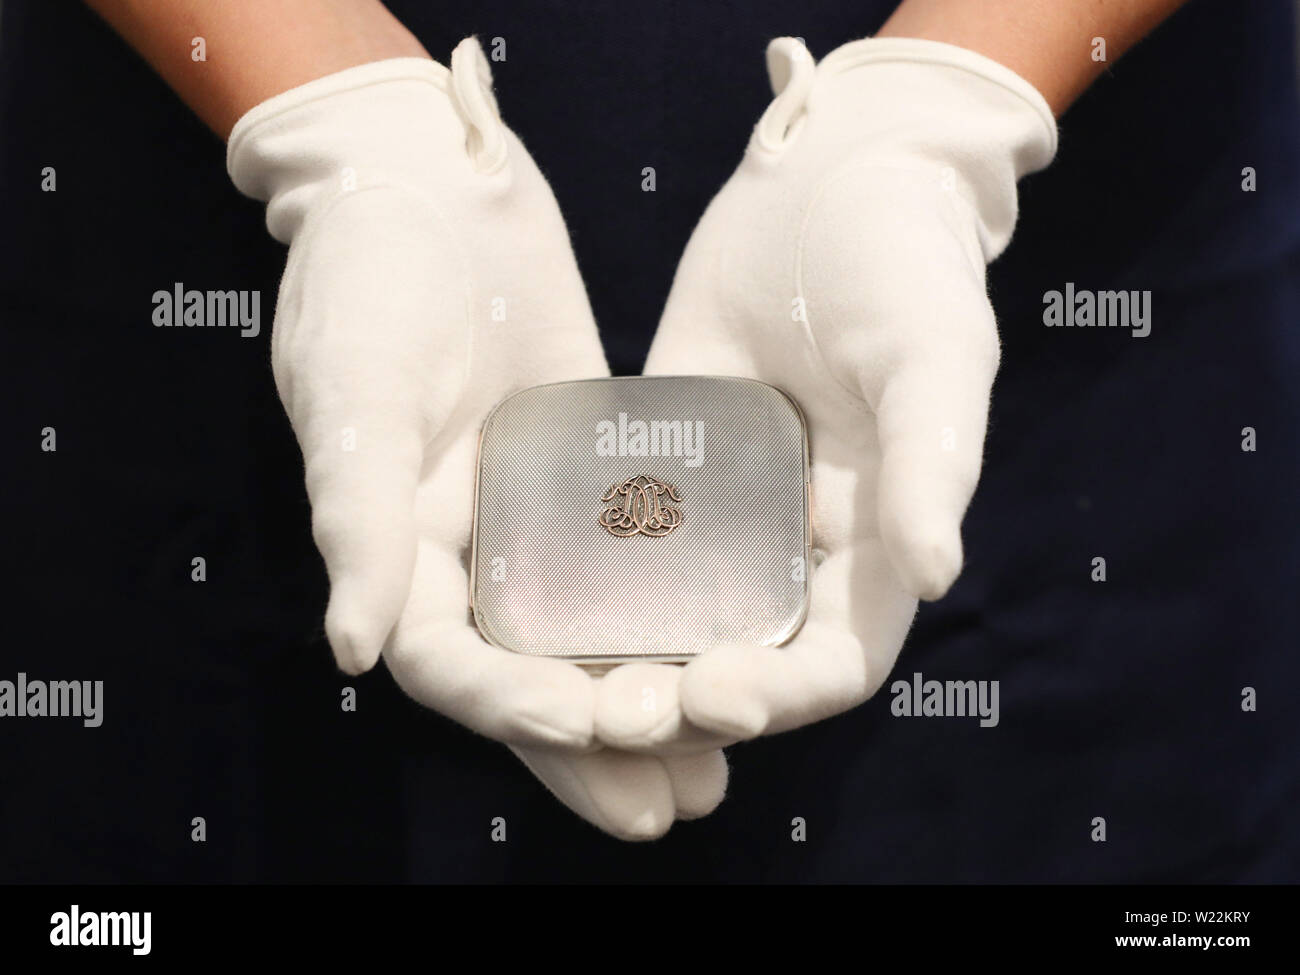 A Sotheby's employee handles a silver cigarette case, once belonging to Sir Winston Churchill, which will be included in Sotheby's upcoming English literature, history, children's books, and illustrations auction. Stock Photo